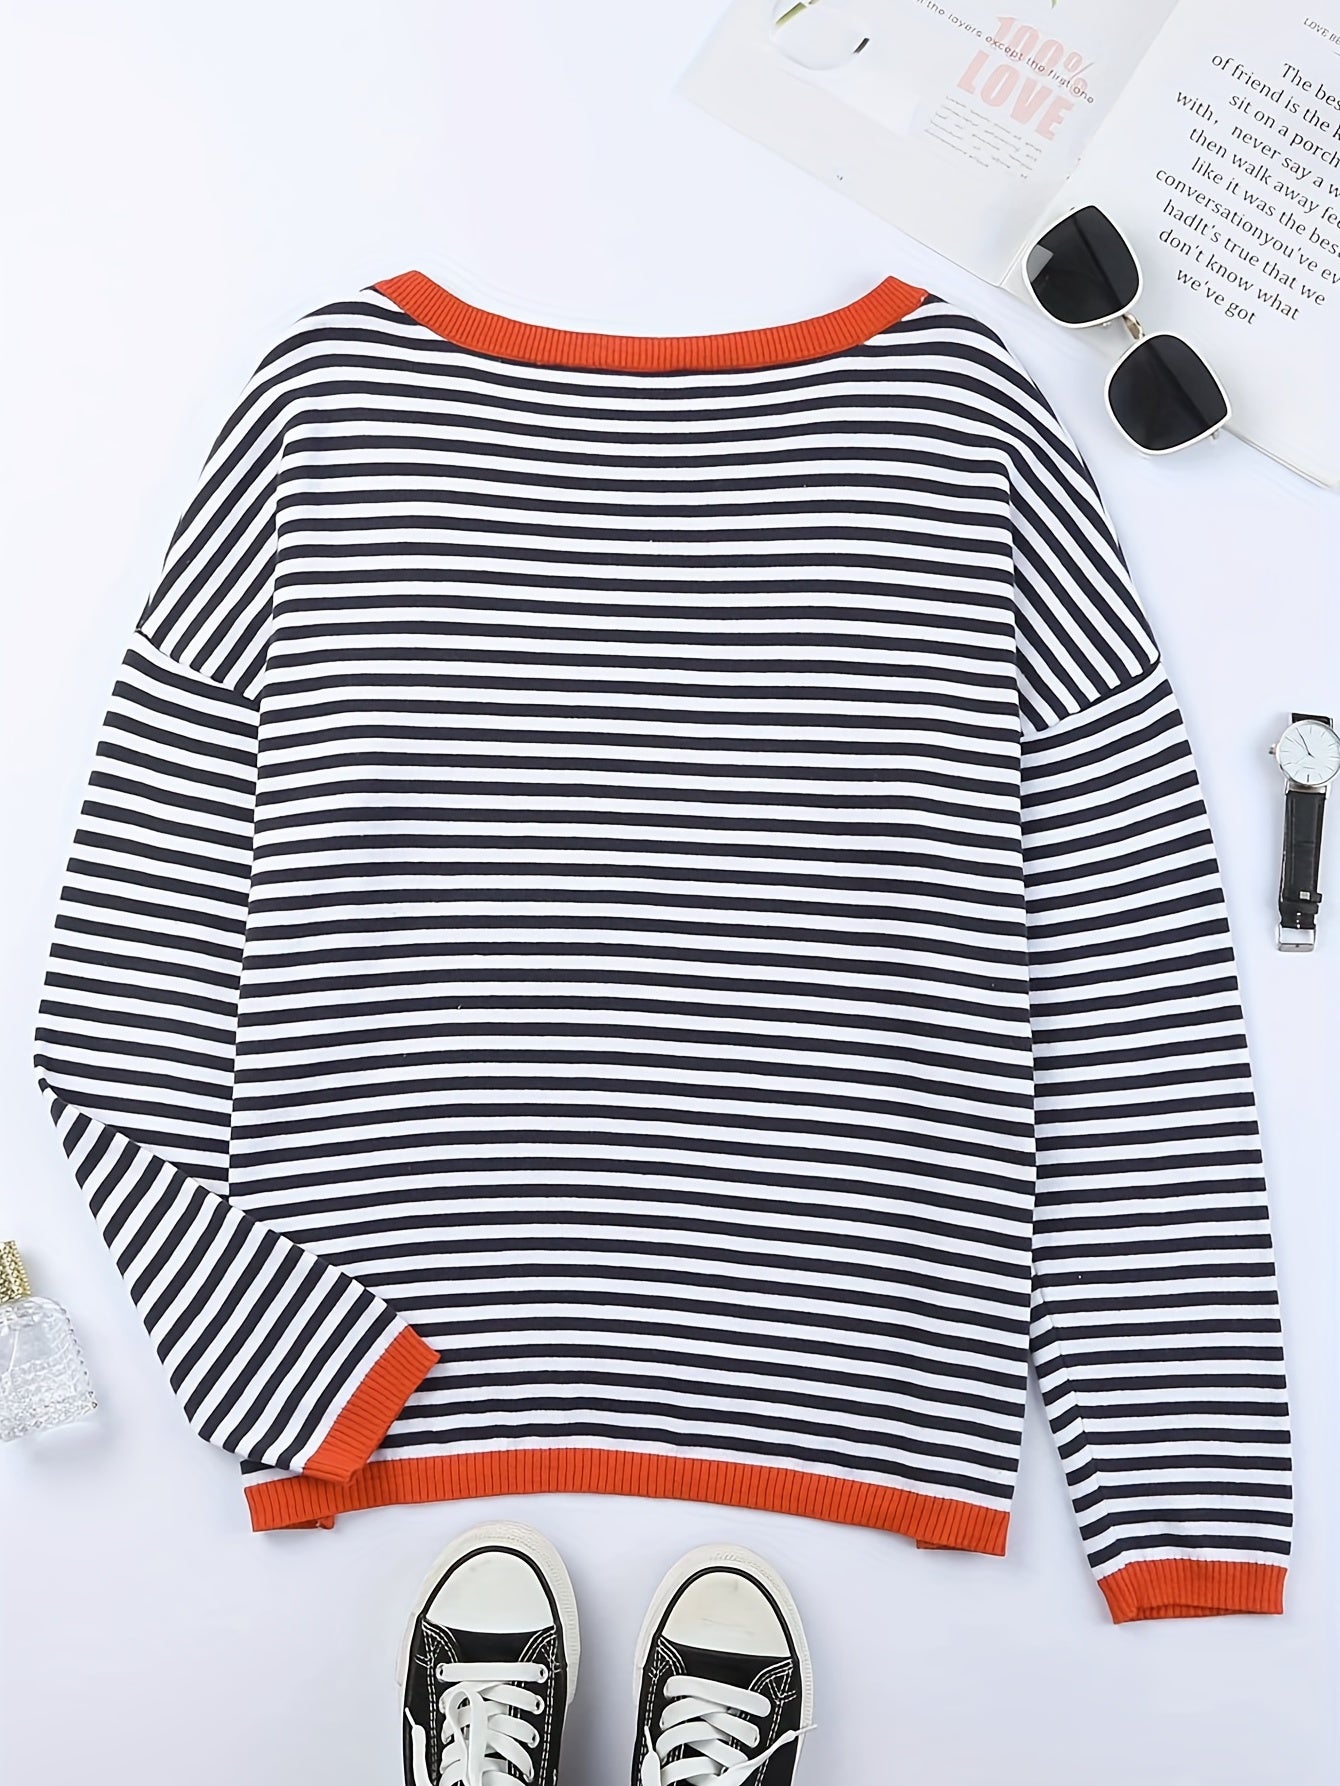 Antmvs Striped Print Crew Neck Knit Sweater, Casual Long Sleeve Versatile Sweater, Women's Clothing